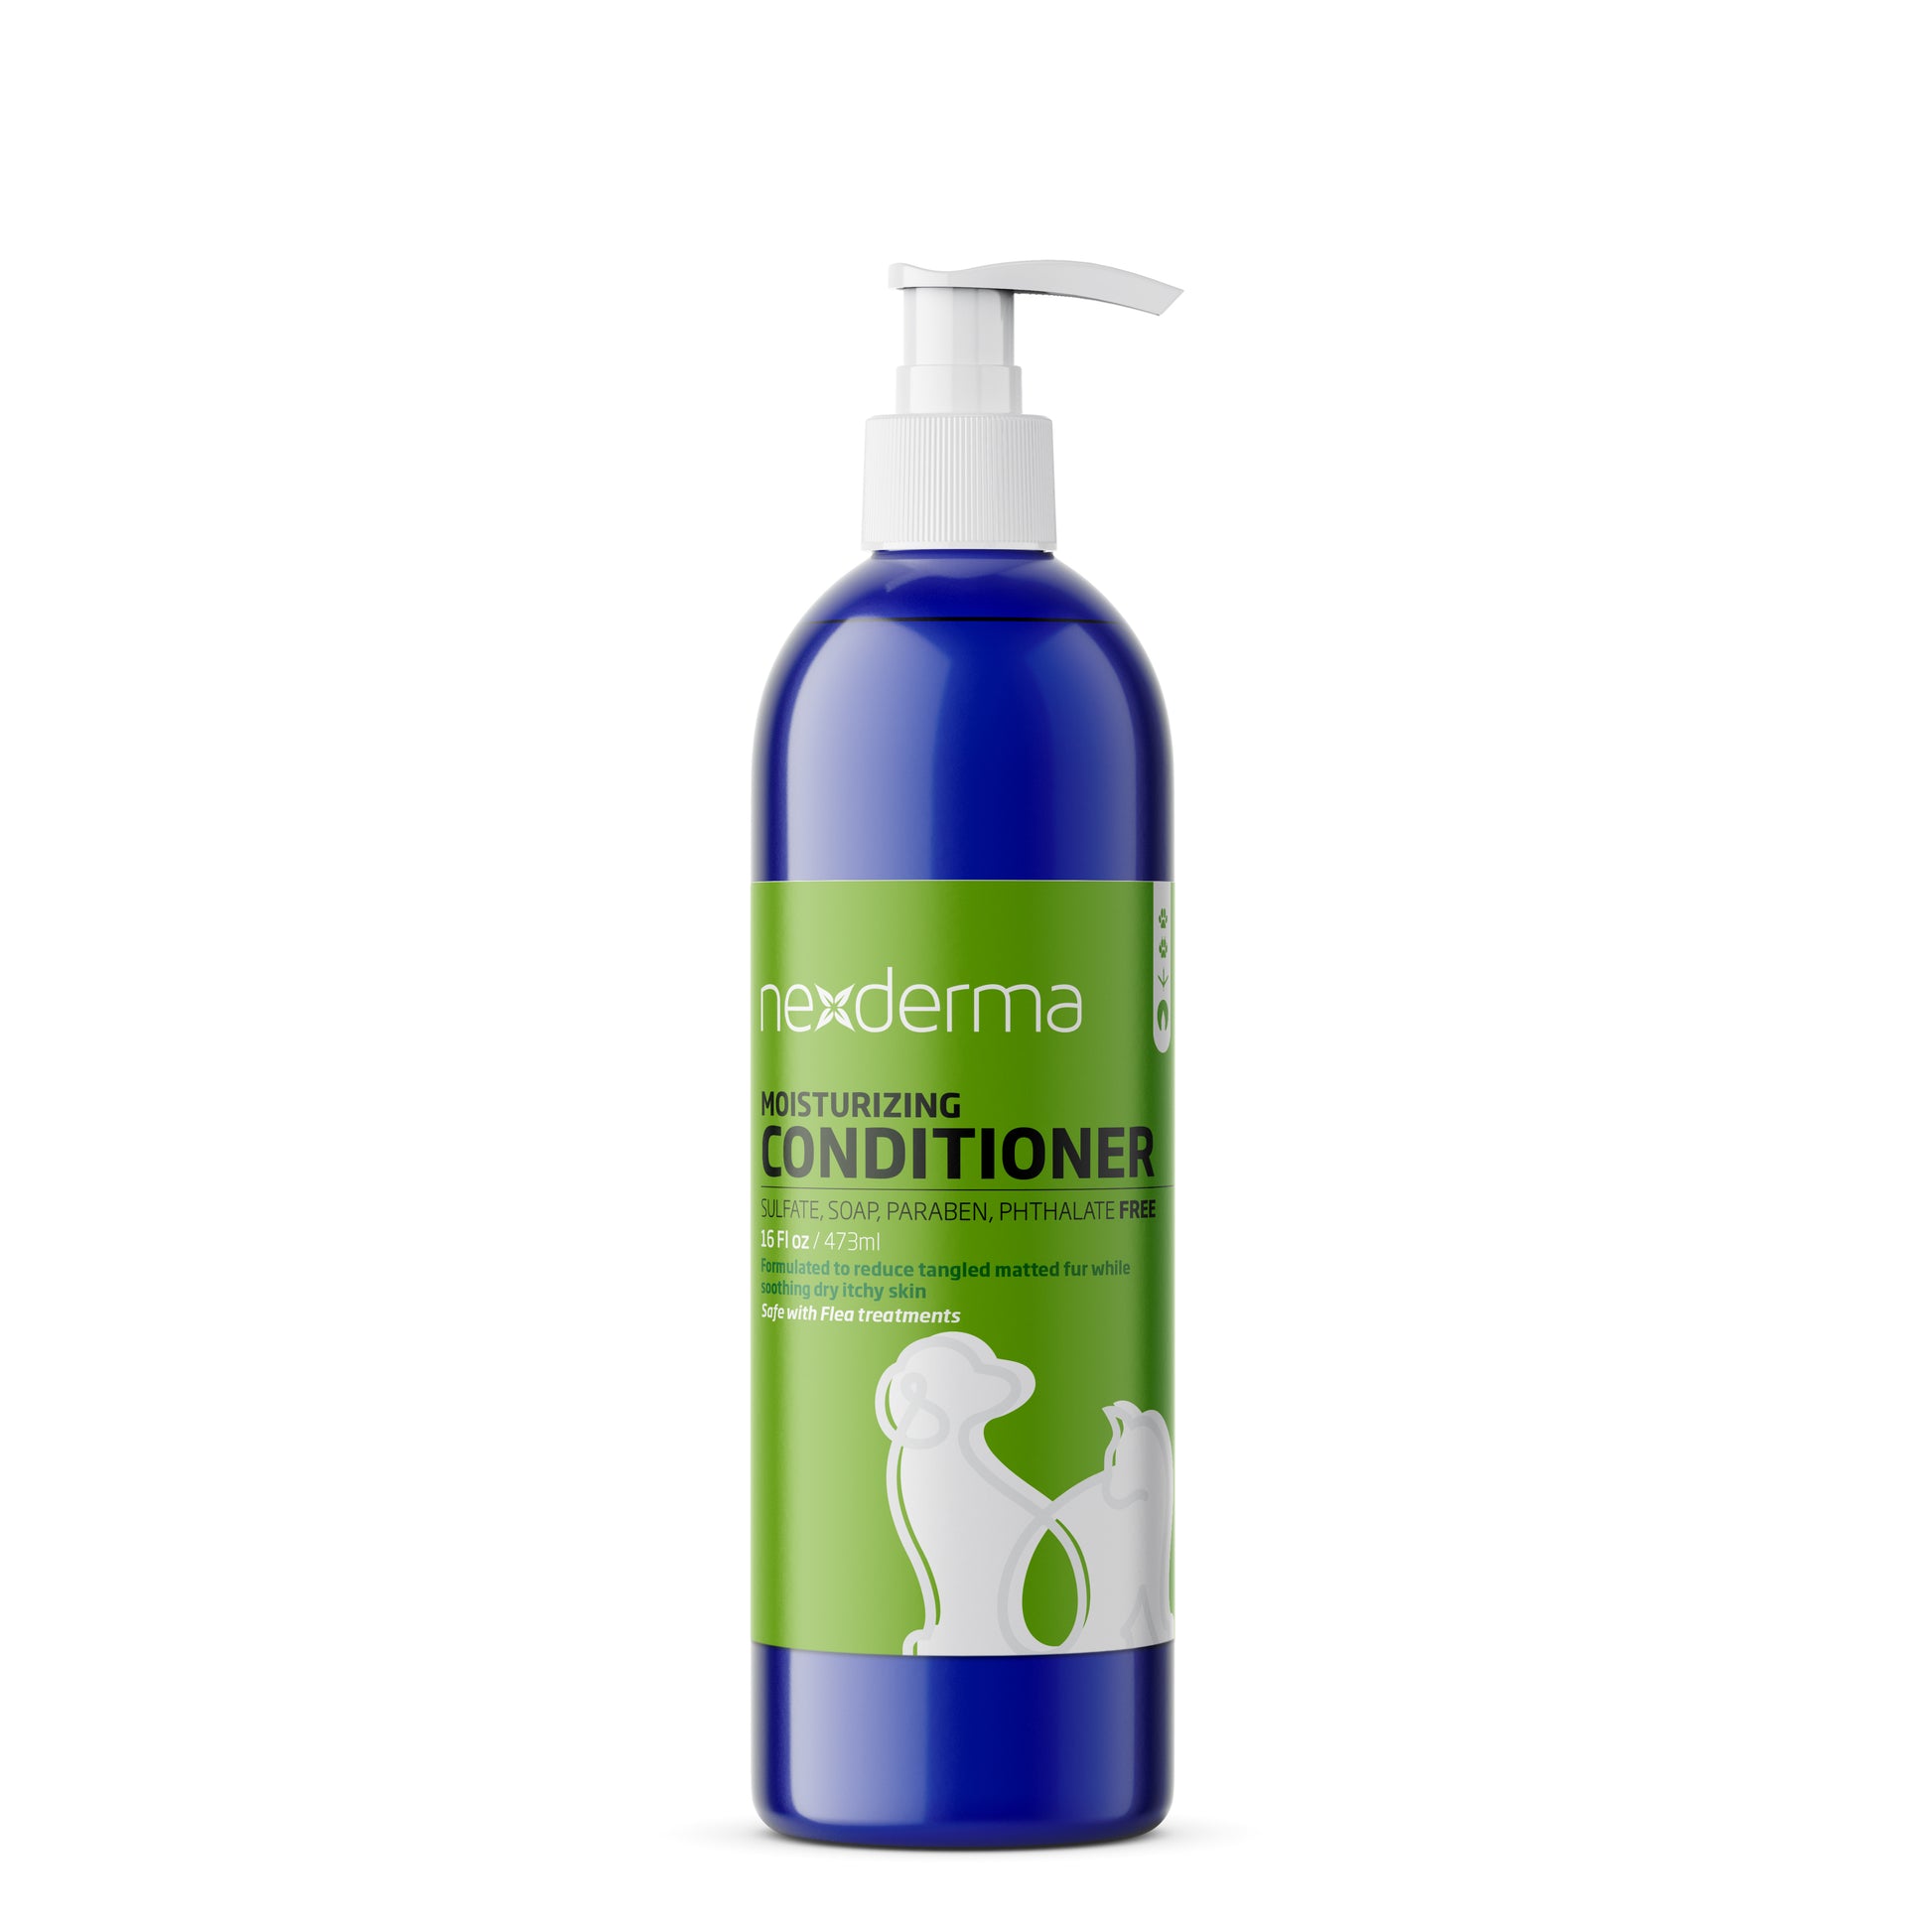 Nexderma's Moisturizing Conditioner is a professionally-formulated, pH balanced product designed for use on both dogs and cats. It effectively hydrates and relieves dry, itchy skin, and helps to detangle fur and eliminate matting, leaving your pet's coat soft and glossy.  16 oz .